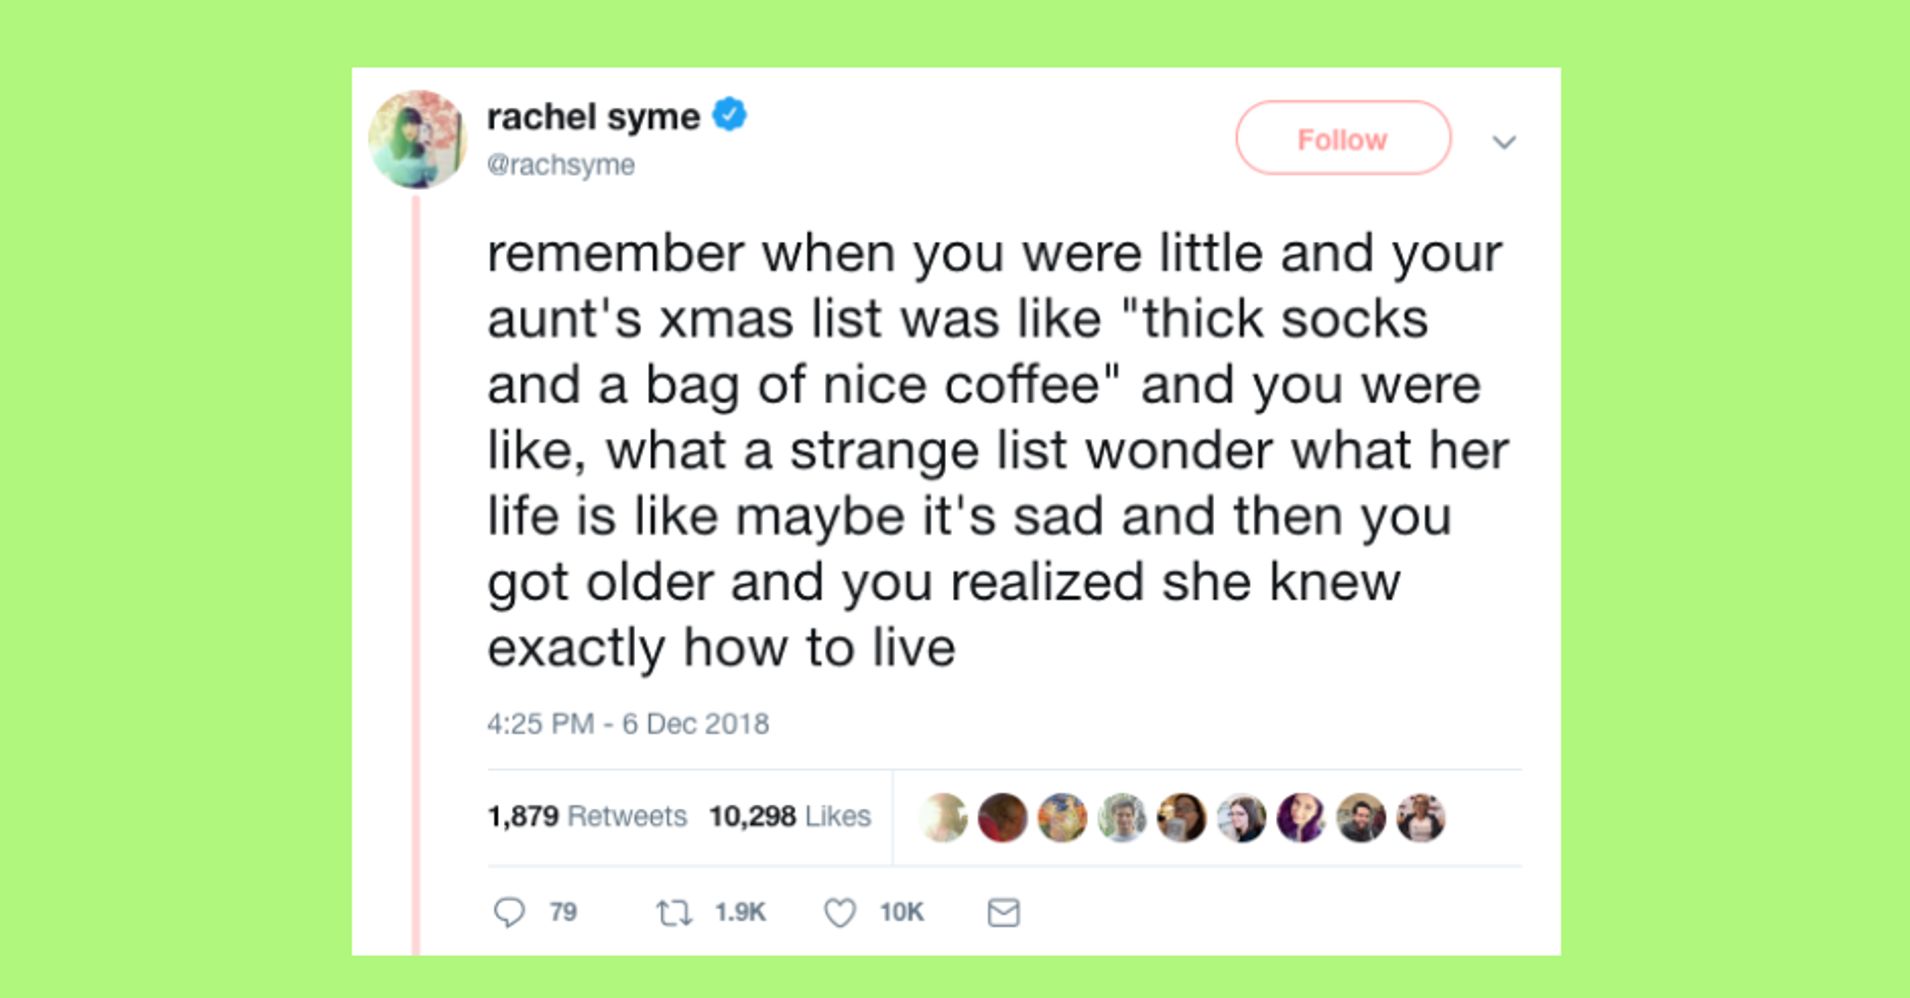 the-20-funniest-tweets-from-women-this-week-dec-1-7-huffpost